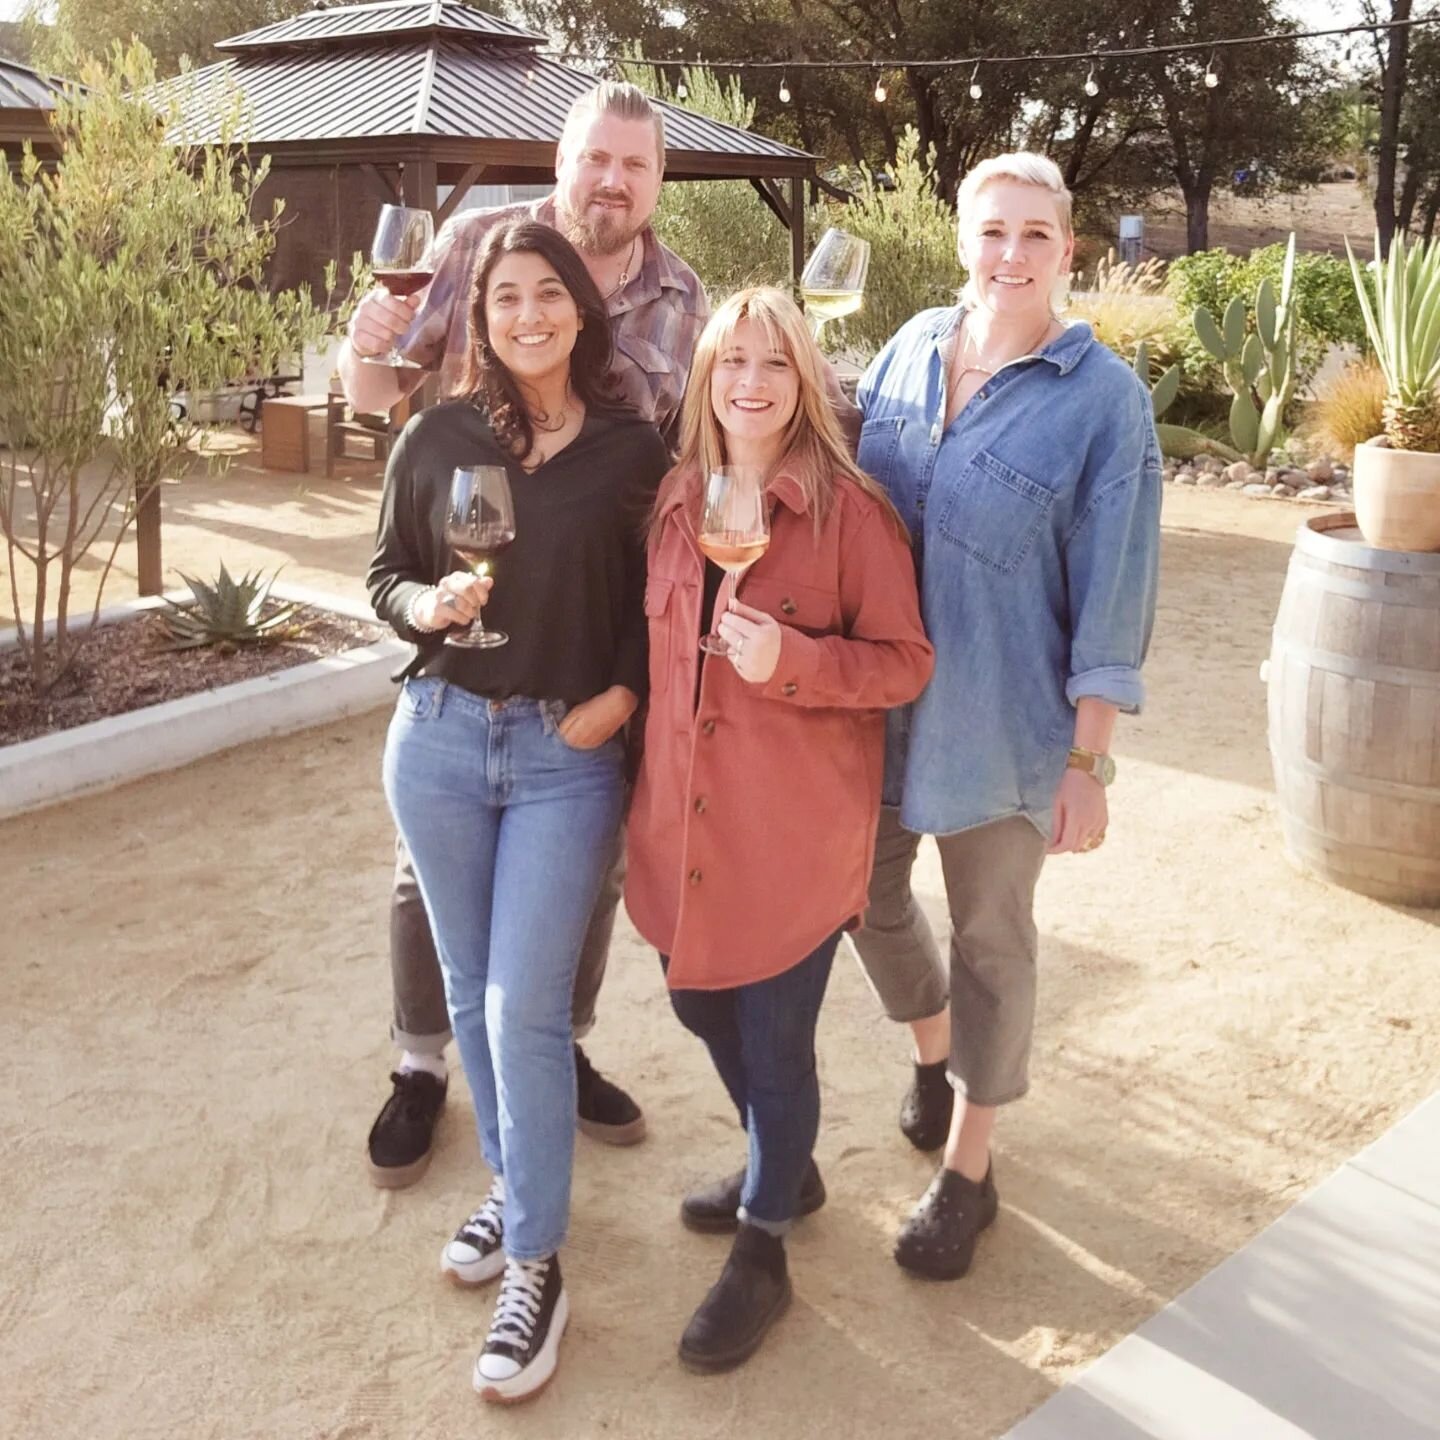 Come visit our small but mighty tasting room team!!! 
(Alondra, David, Bre &amp; Elana)

Booking link in bio

#wine #napa #winetasting #familyrun #weekend #Fall #cheers #napavalley #visitnapavalley